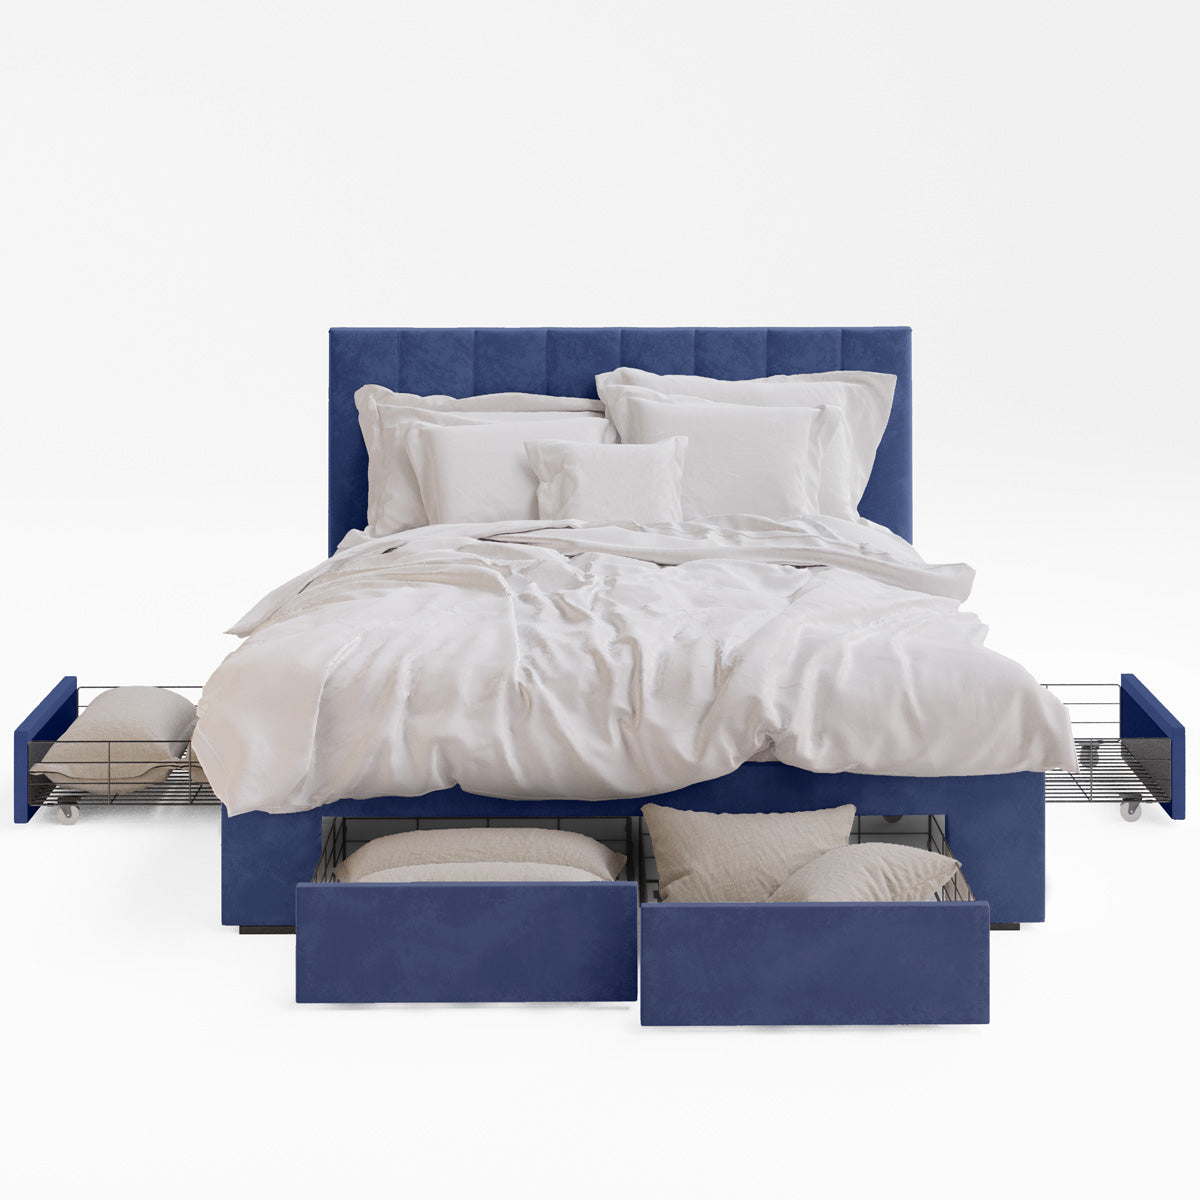 Ormond Bed Frame with Four Extra Large Drawers (Navy Blue Velvet)